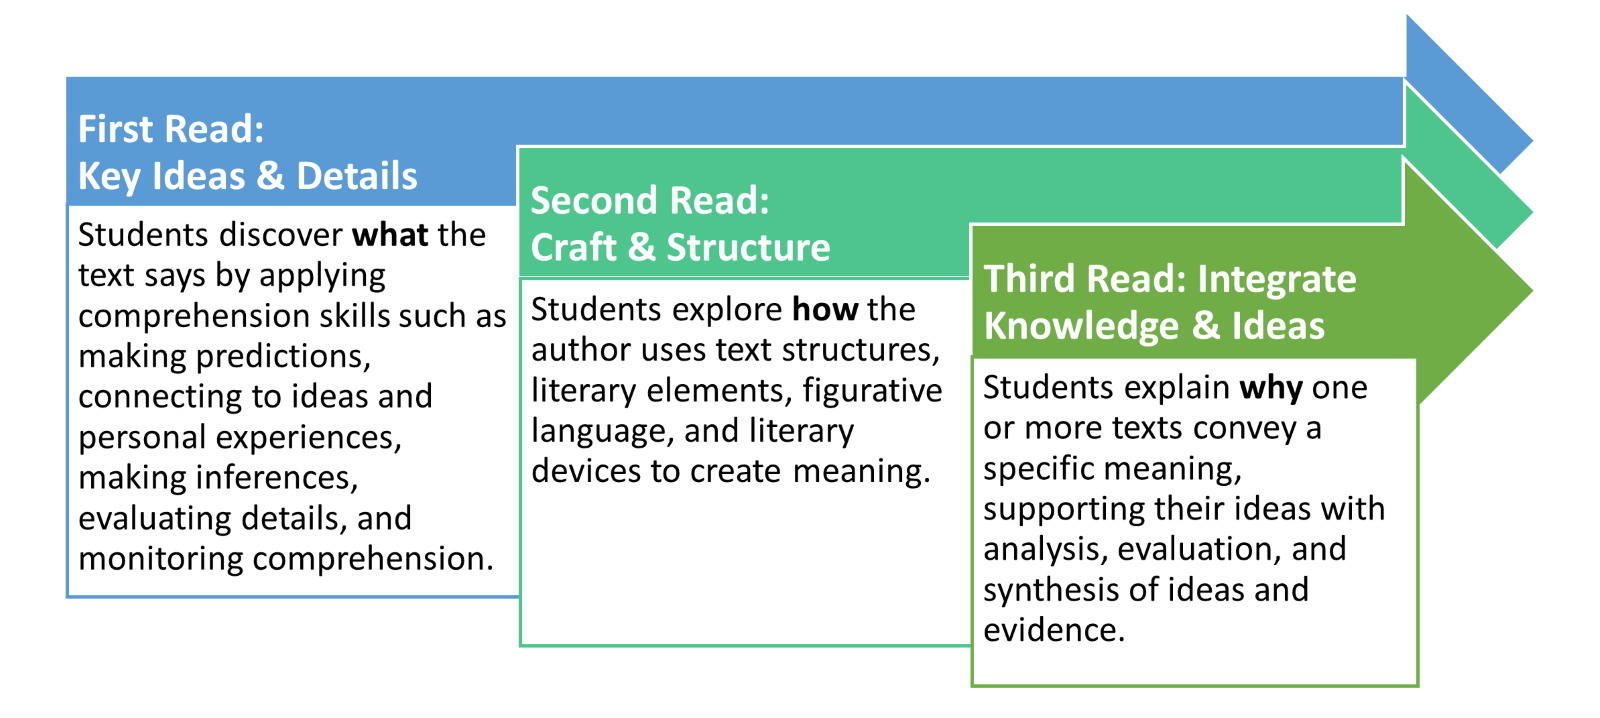 Infographic showing three arrows and boxes, moving from left to right. The first box heading, colored blue, reads "First Read: Key Ideas & Details." The body text in the first box reads "Students discover what the text says by applying comprehension skills such as making predictions, connecting to ideas and personal experiences, making inferences, evaluating details, and monitoring comprehension. The second box heading, colored light green, reads “Second Read: Craft and Structure.” The body text in the third box reads, “students explore how the author uses text structures, literary elements, figurative language, and literary devices to create meaning.” The third box heading, colored a darker green, reads “Third Read: Integrate Knowledge & Ideas.” The body text in the third box reads, “Students explain why one or more texts convey a specific meaning, supporting their ideas with analysis, evaluation, and synthesis of ideas and evidence.”  